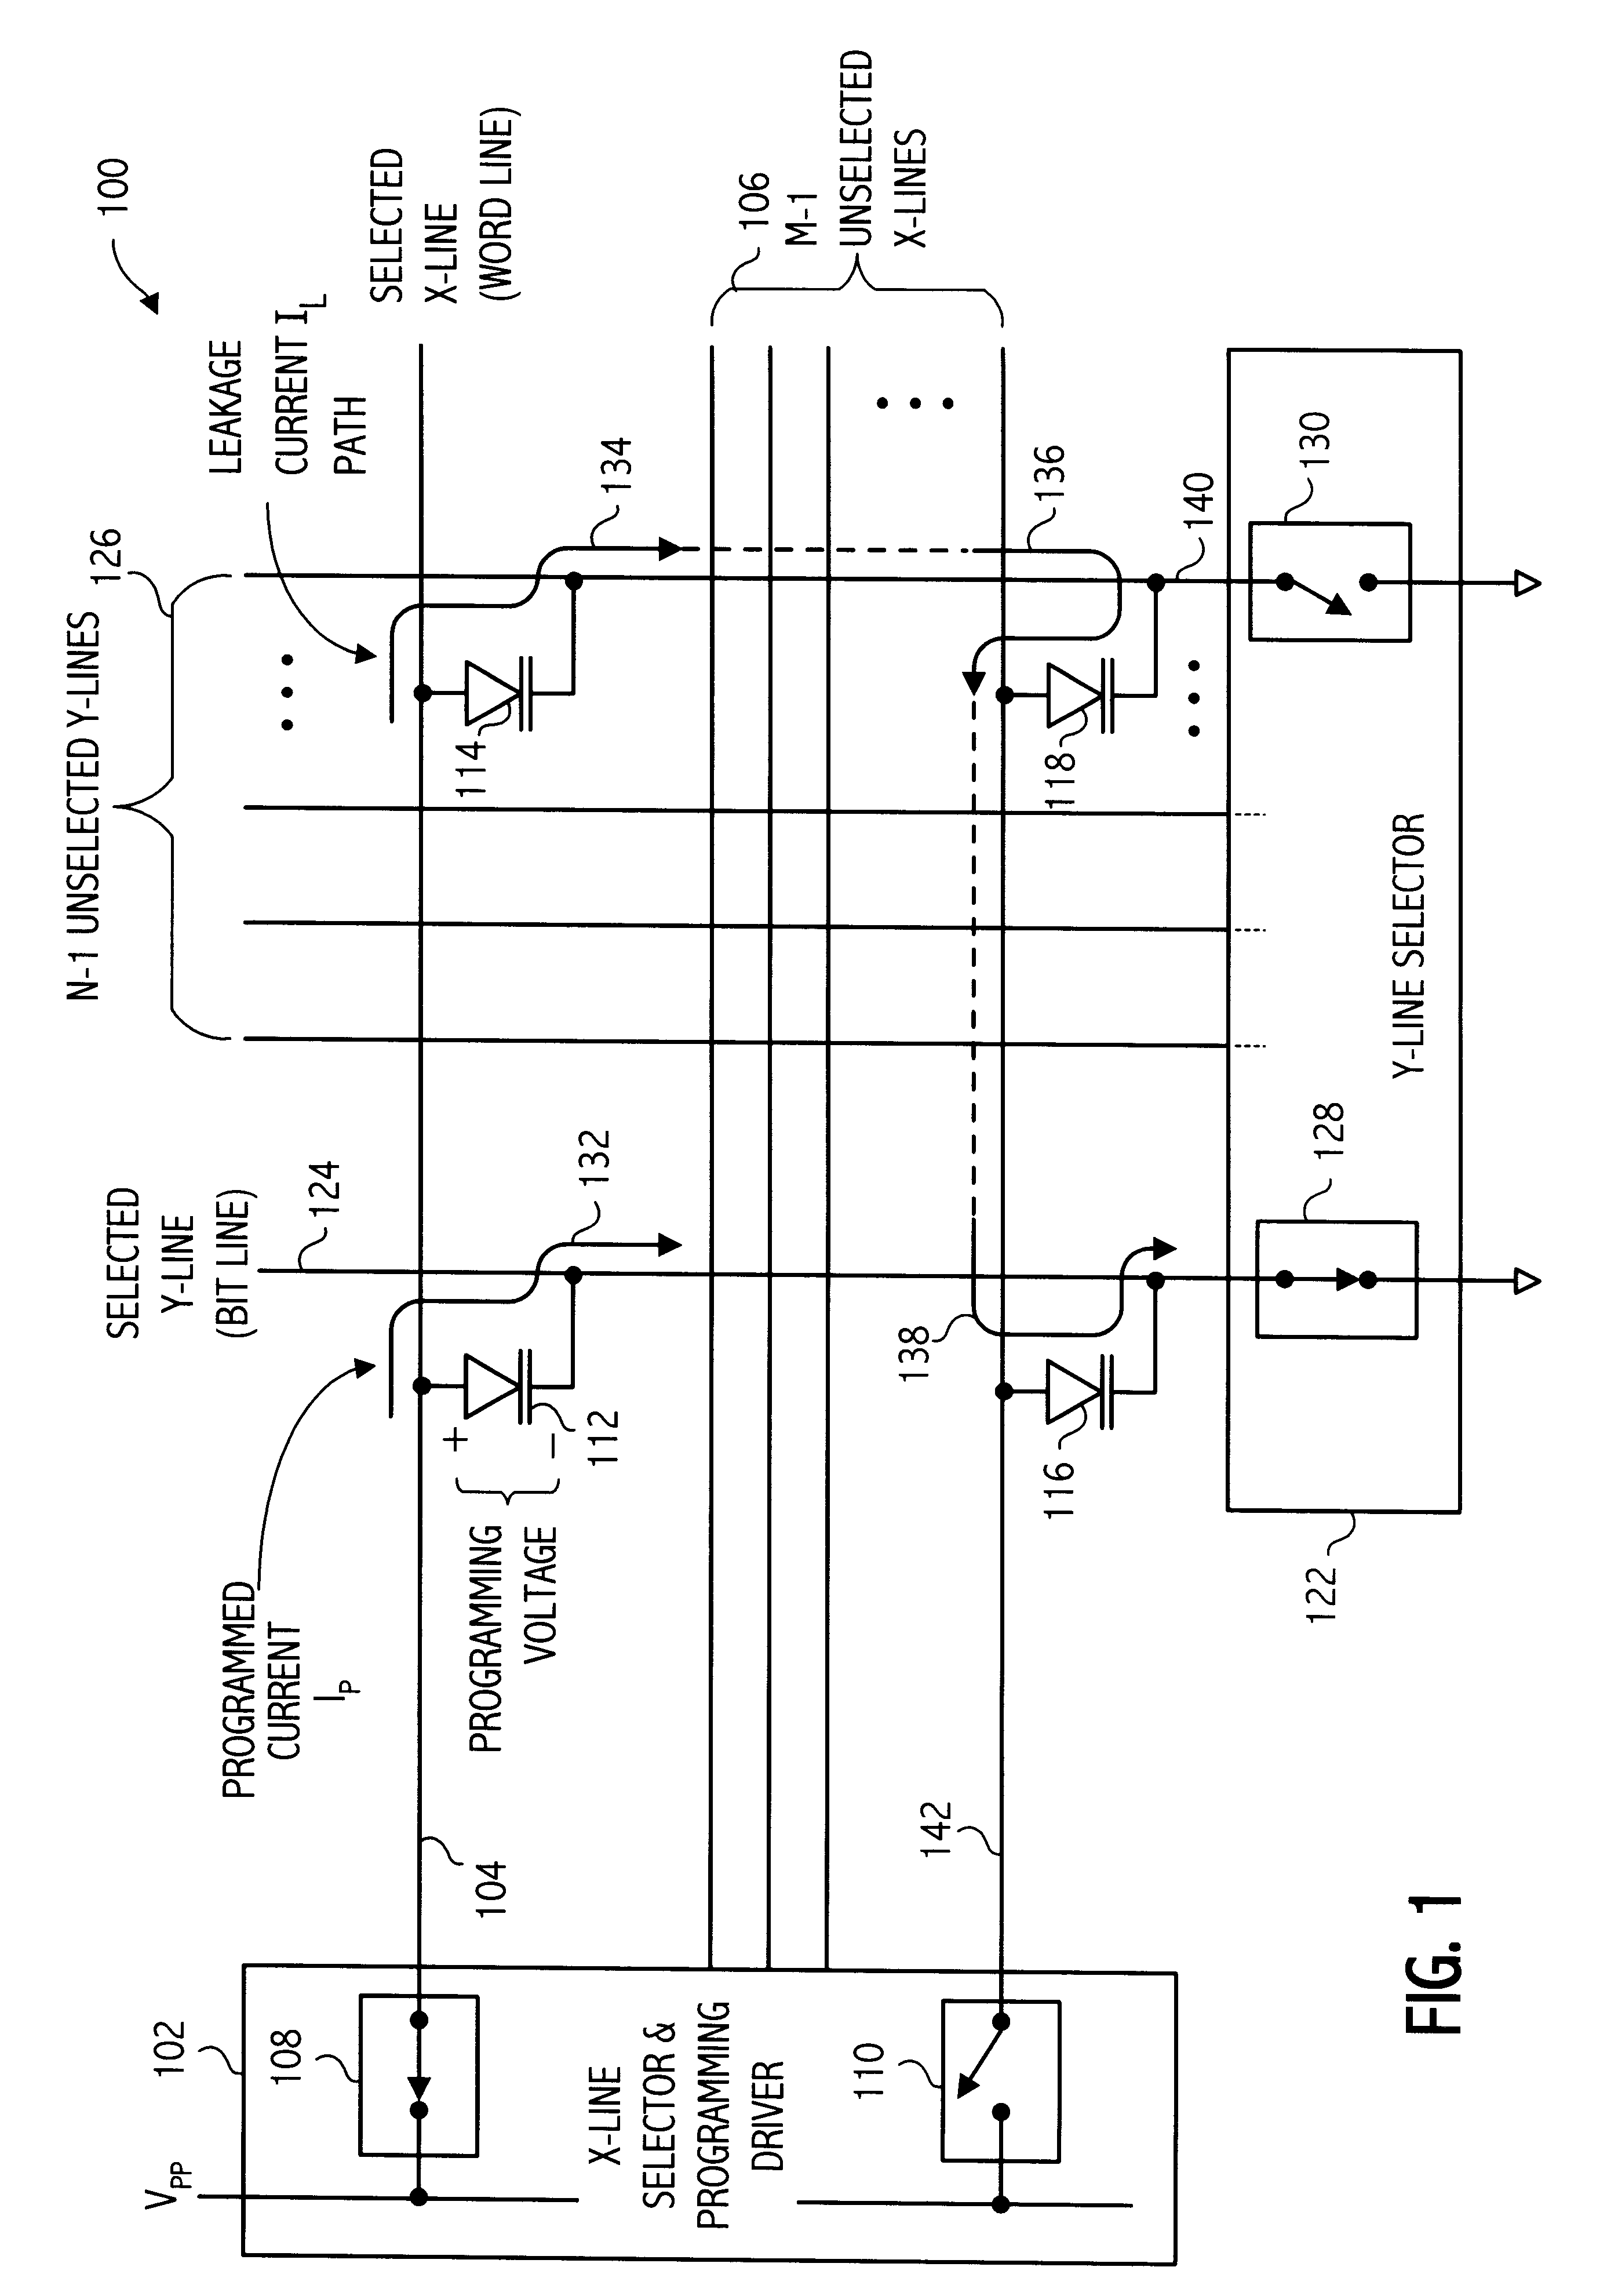 Method and apparatus for discharging memory array lines